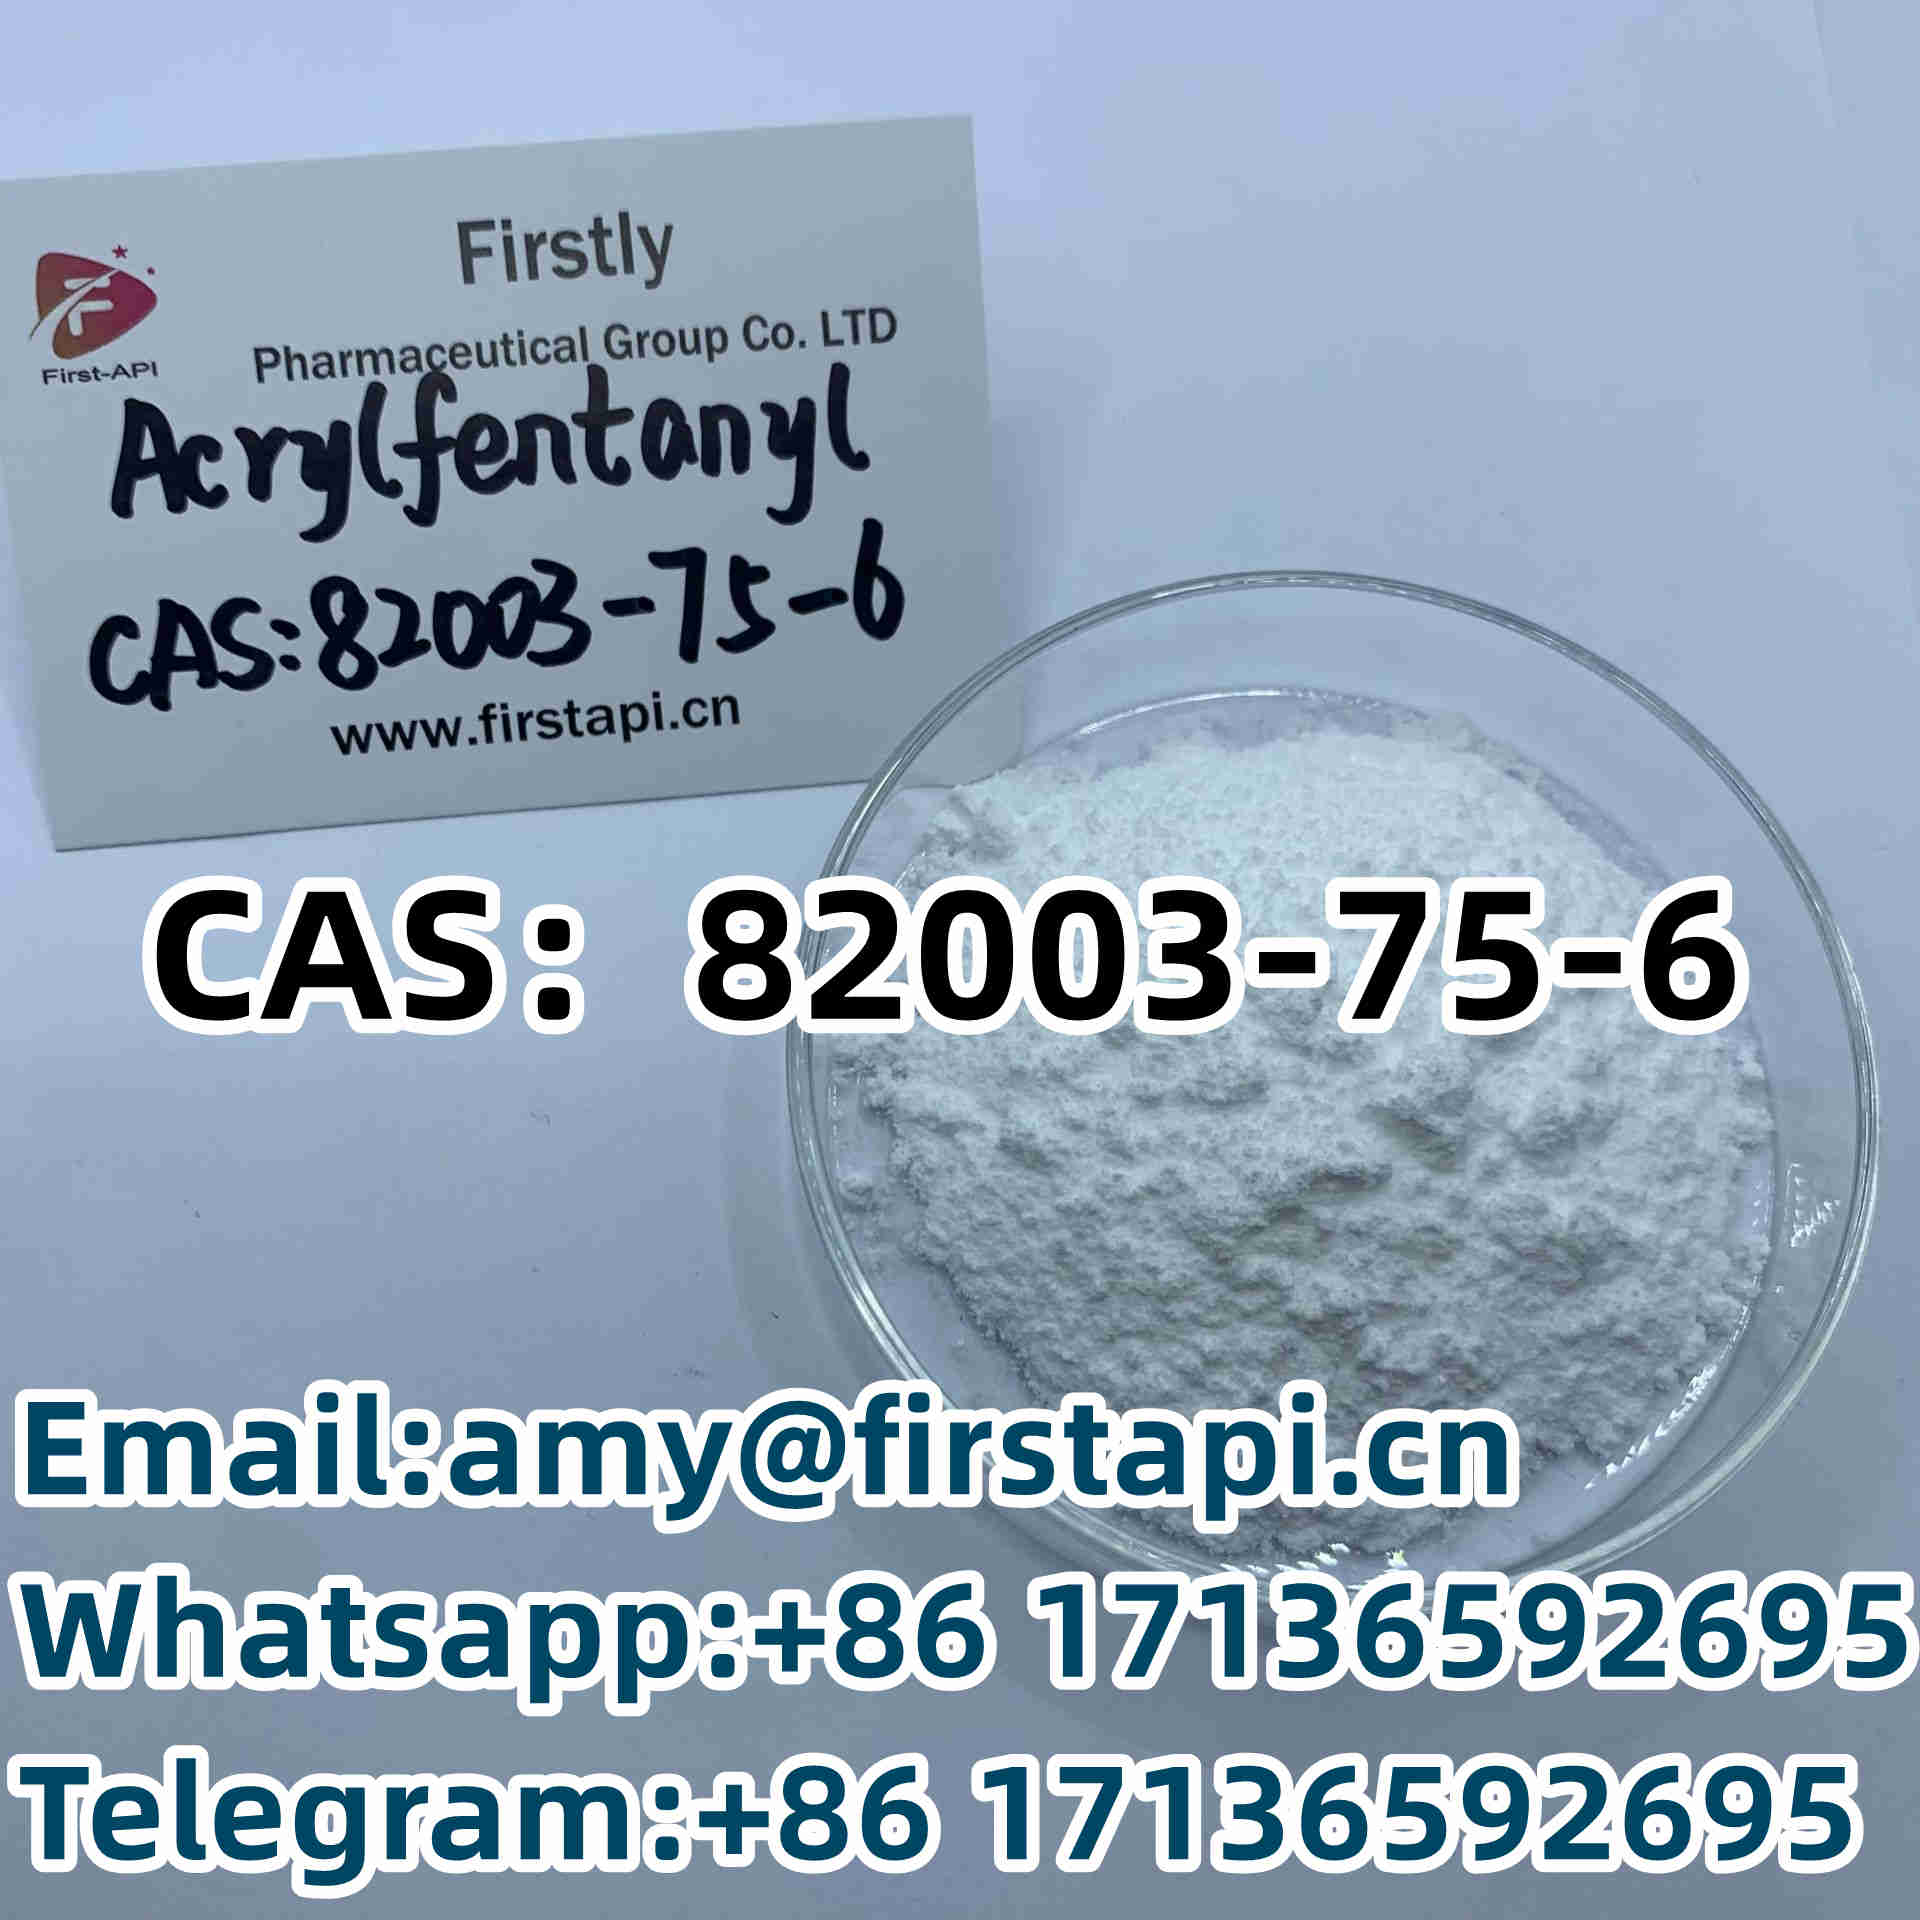 CAS No.:82003-75-6,Chemical Name:Acrylfentanyl，Whatsapp:+86 17136592695,made in china - photo